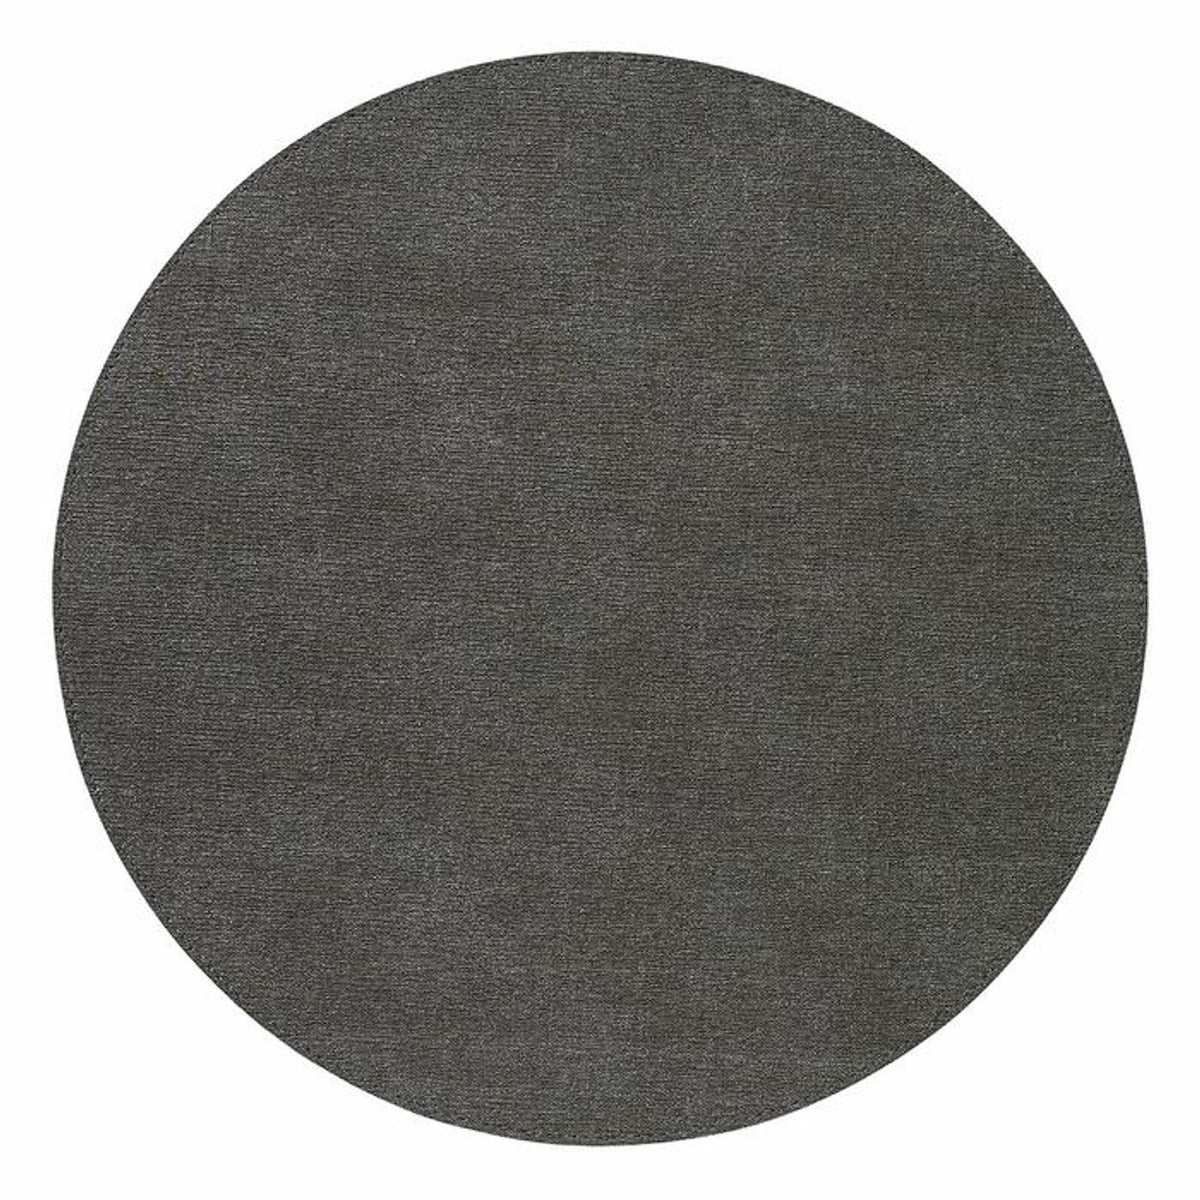 Presto Placemat Charcoal Round Set of 4